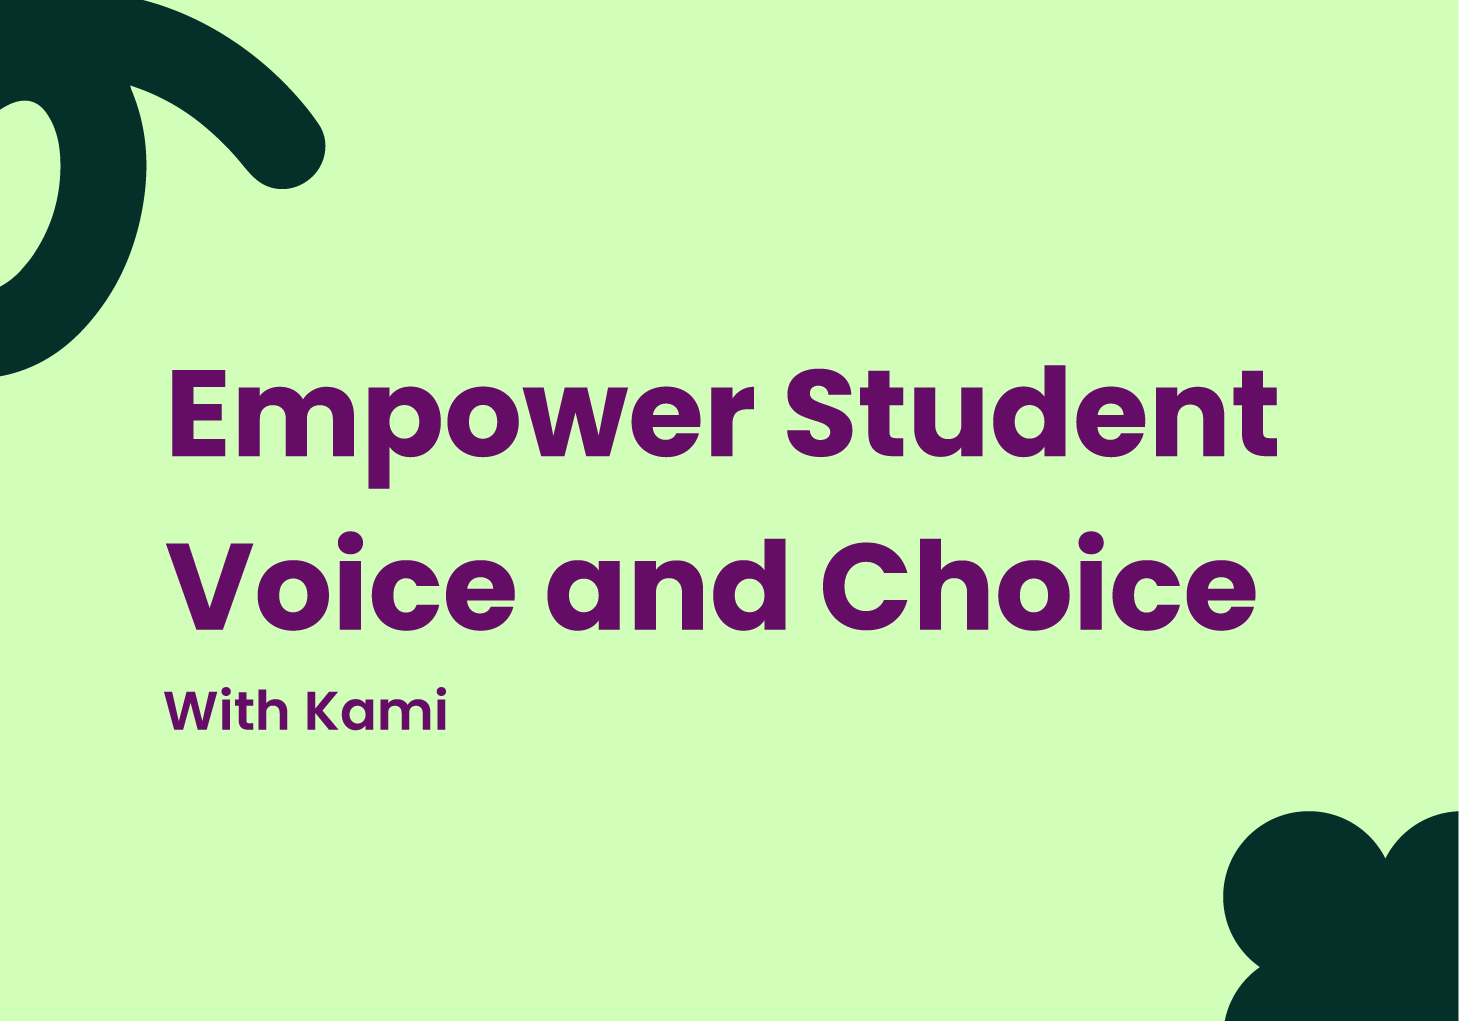 Empower Student Voice and Choice